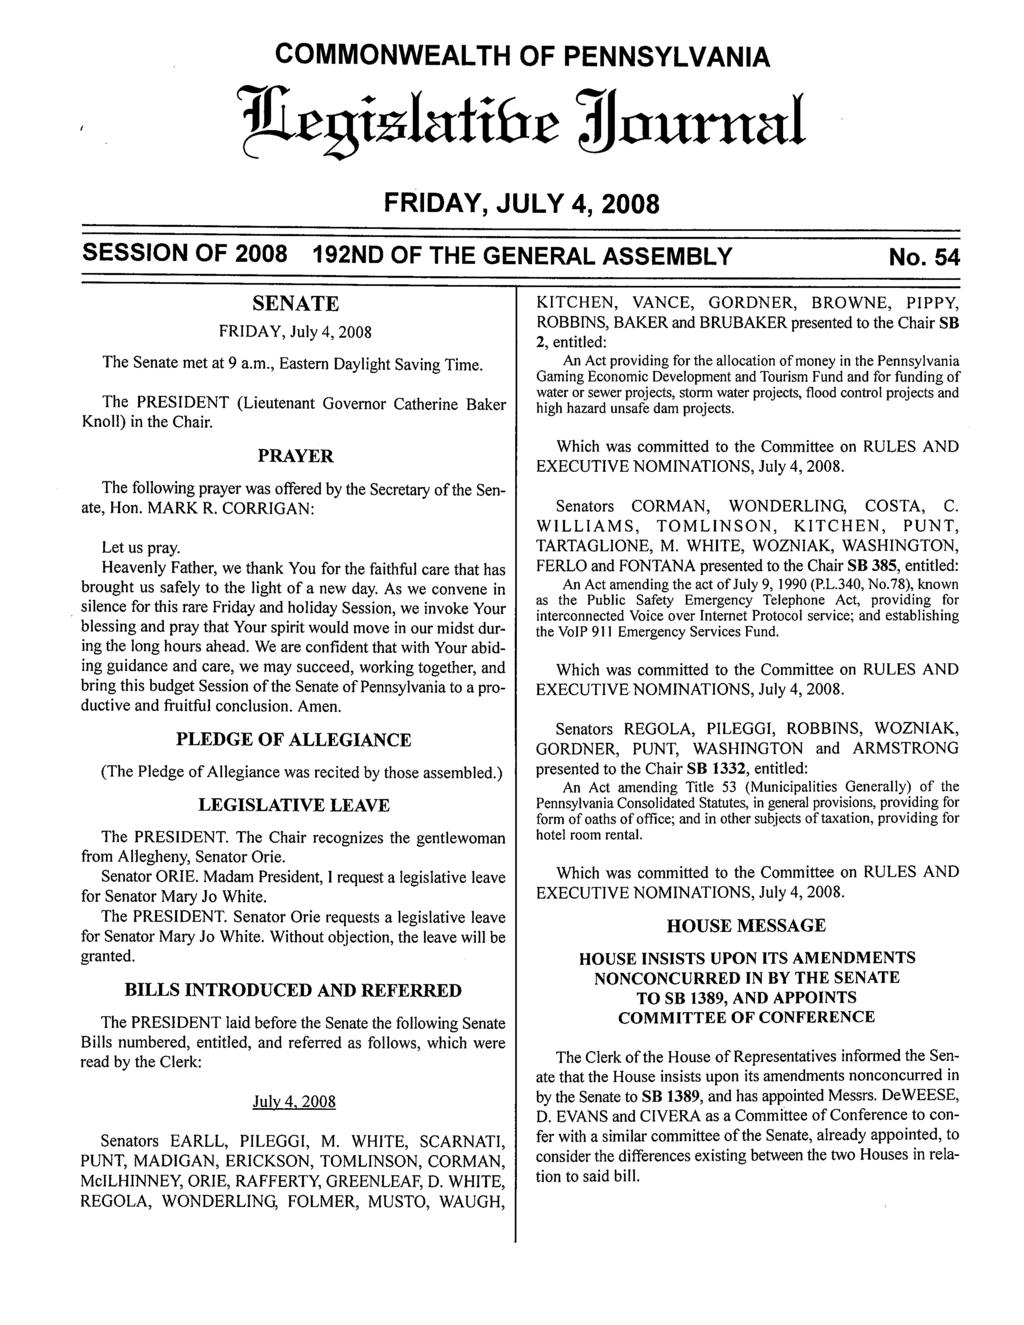 COMMONWEALTH OF PENNSYLVANIA FRIDAY, JULY 4, 2008 M nurnal SESSION OF 2008 192ND OF THE GENERAL ASSEMBLY No. 54 SENATE FRIDAY, July 4, 2008 The Senate met at 9 a.m., Eastern Daylight Saving Time.